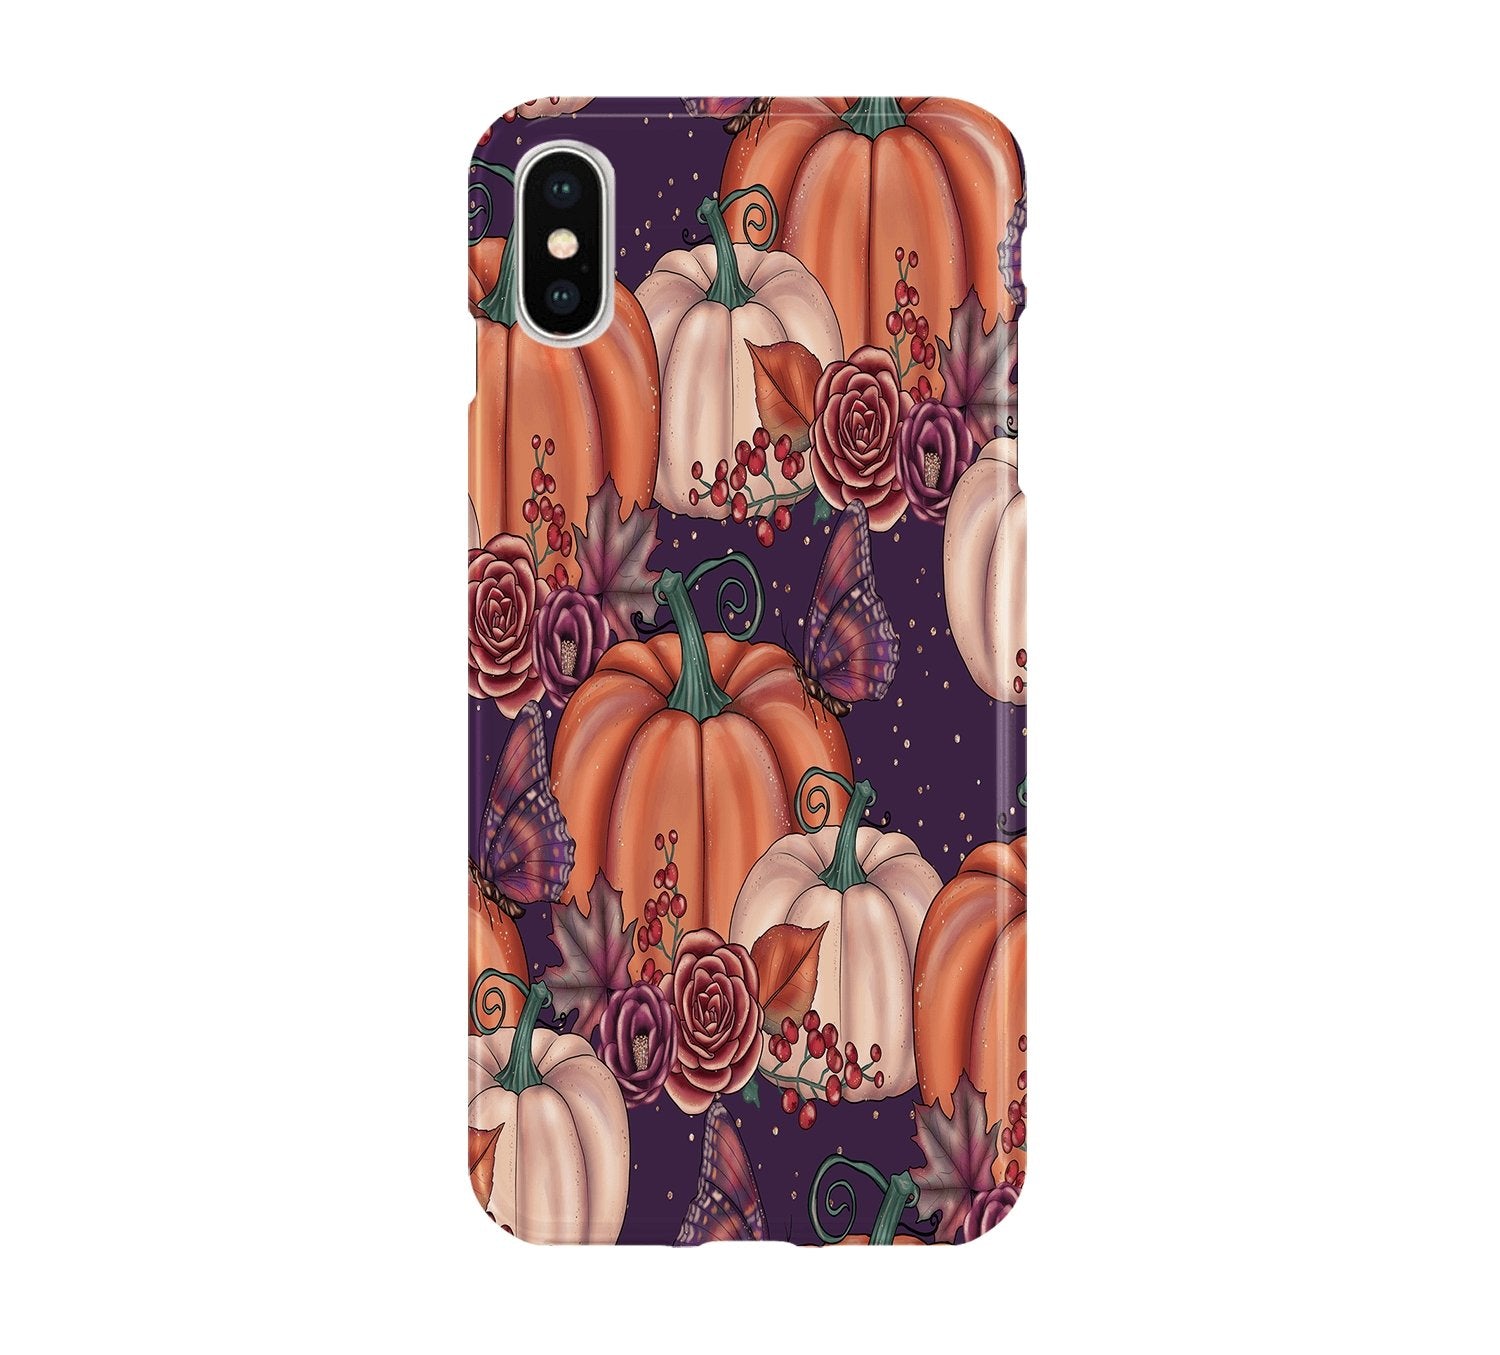 Autumn Pumpkin - iPhone phone case designs by CaseSwagger